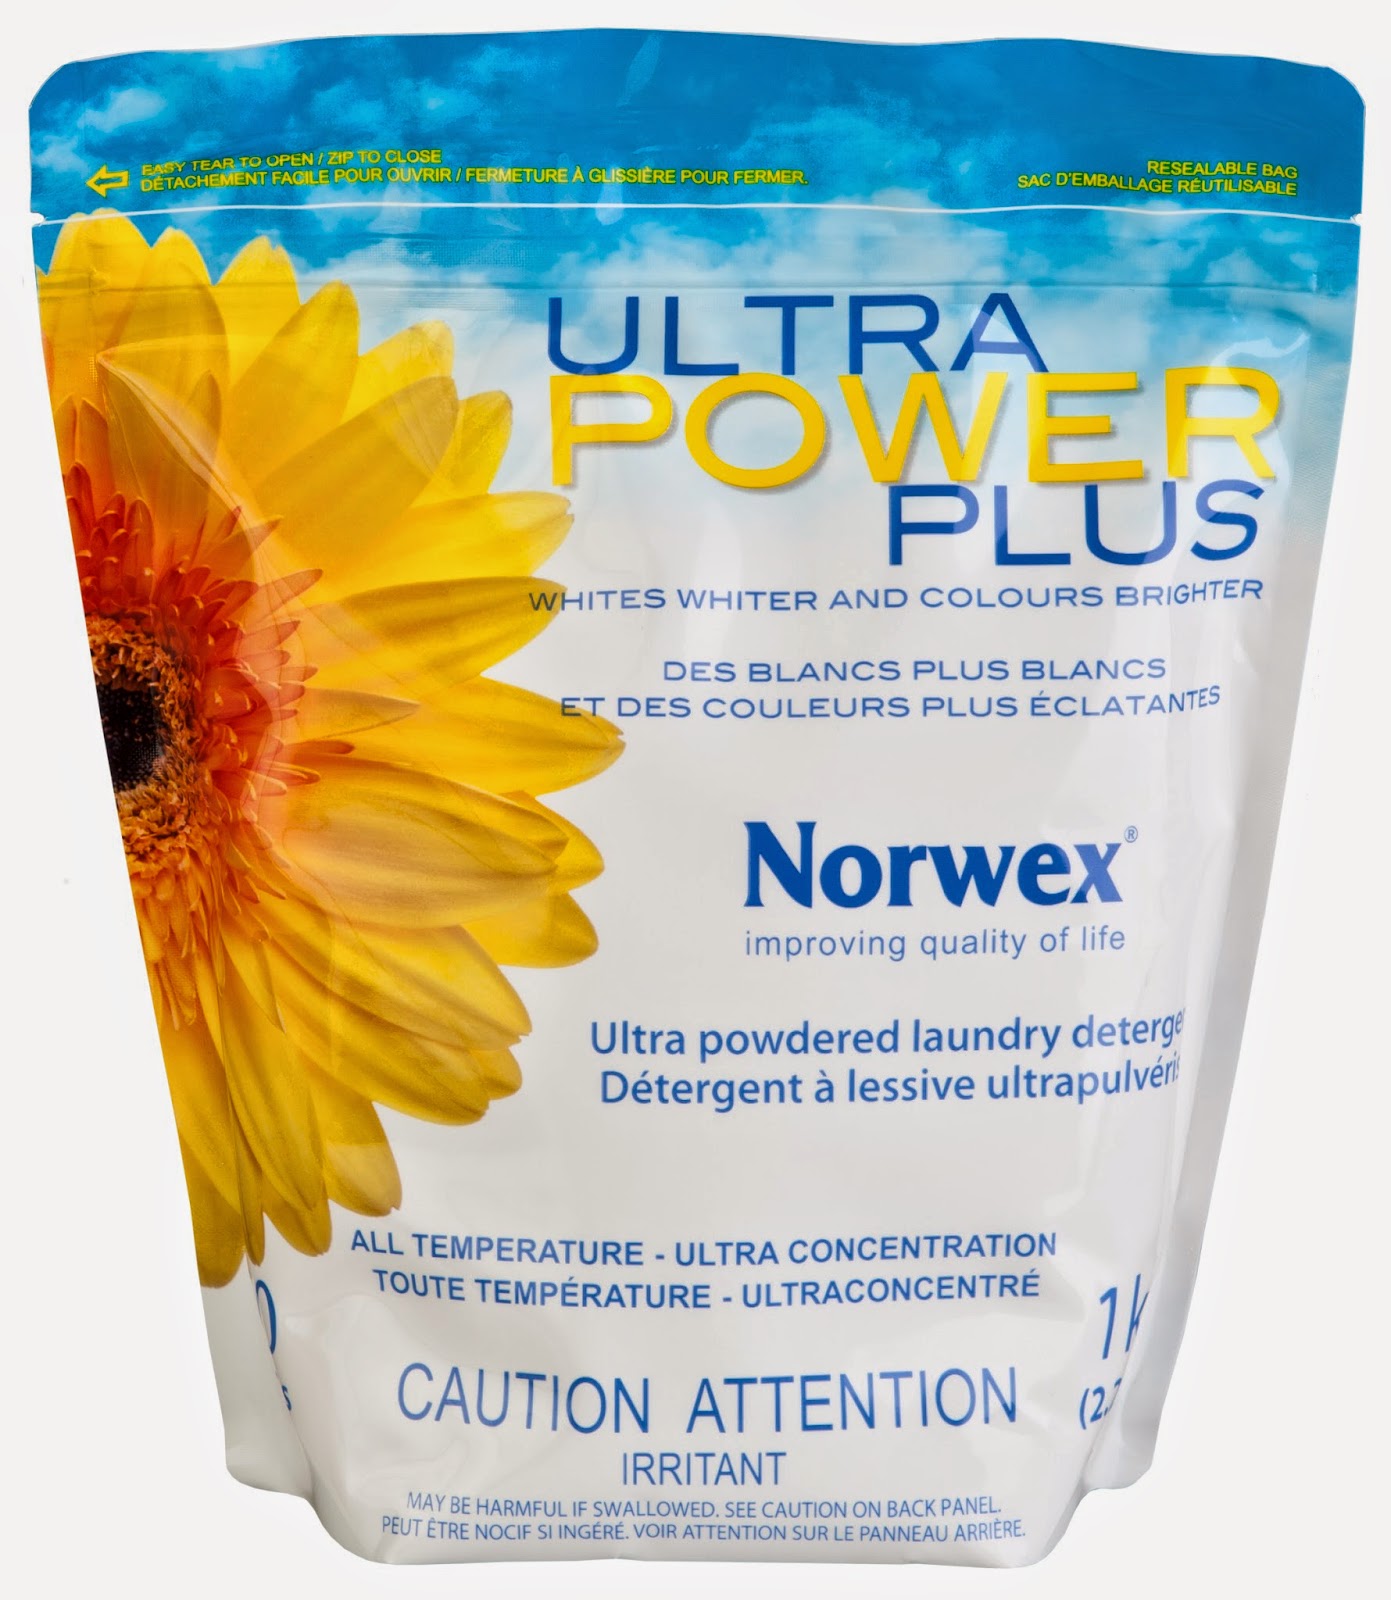 Review - Ultra Power Plus Laundry Detergent by Norwex